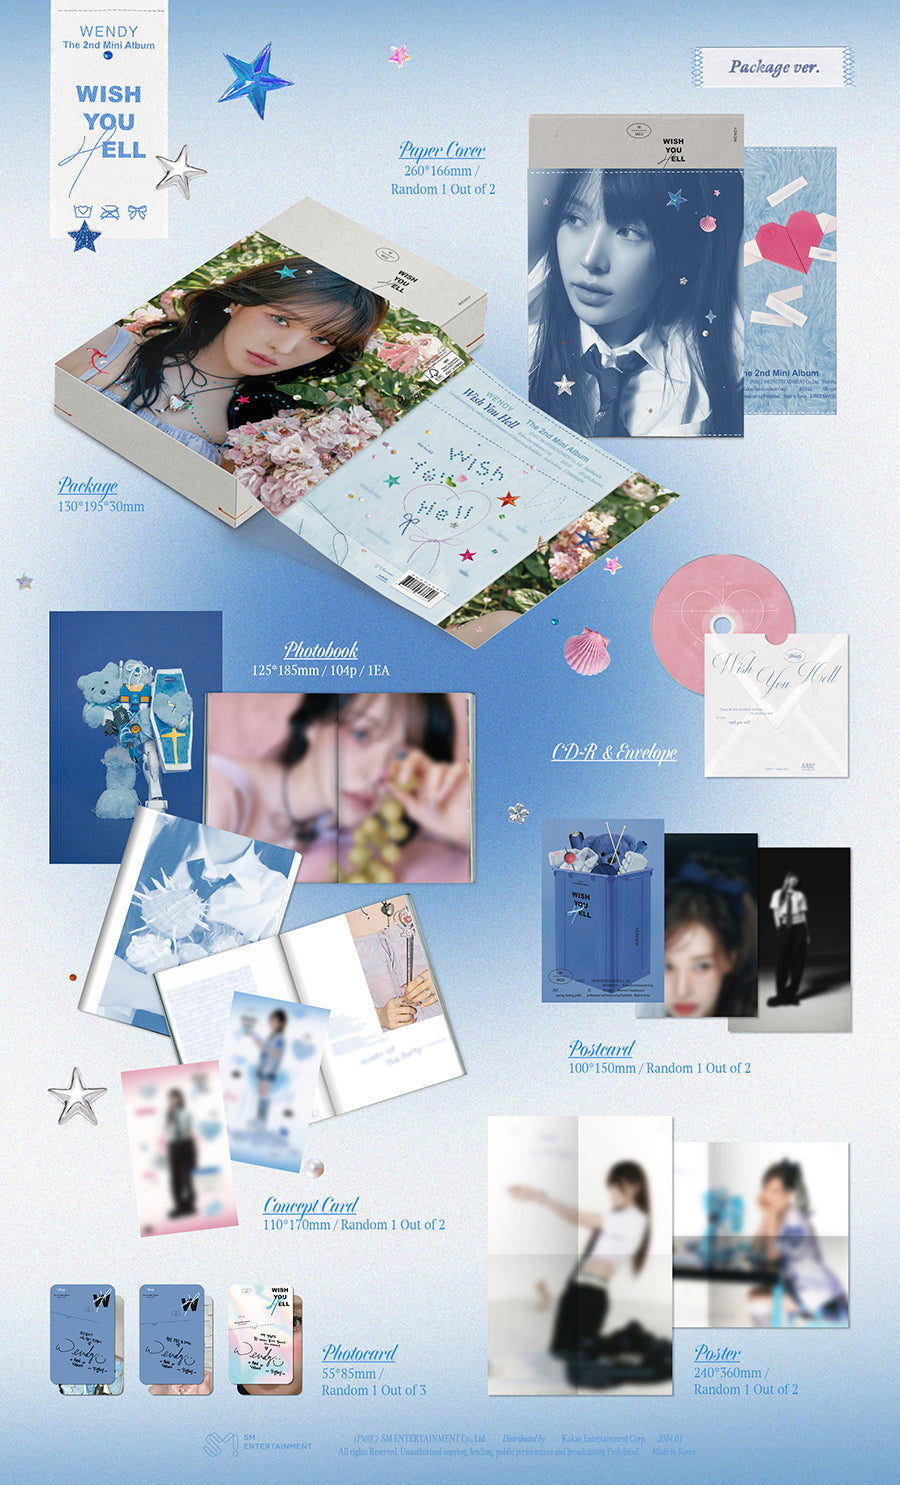 WENDY 2ND MINI ALBUM - WISH YOU HELL (PACKAGE VERSION)